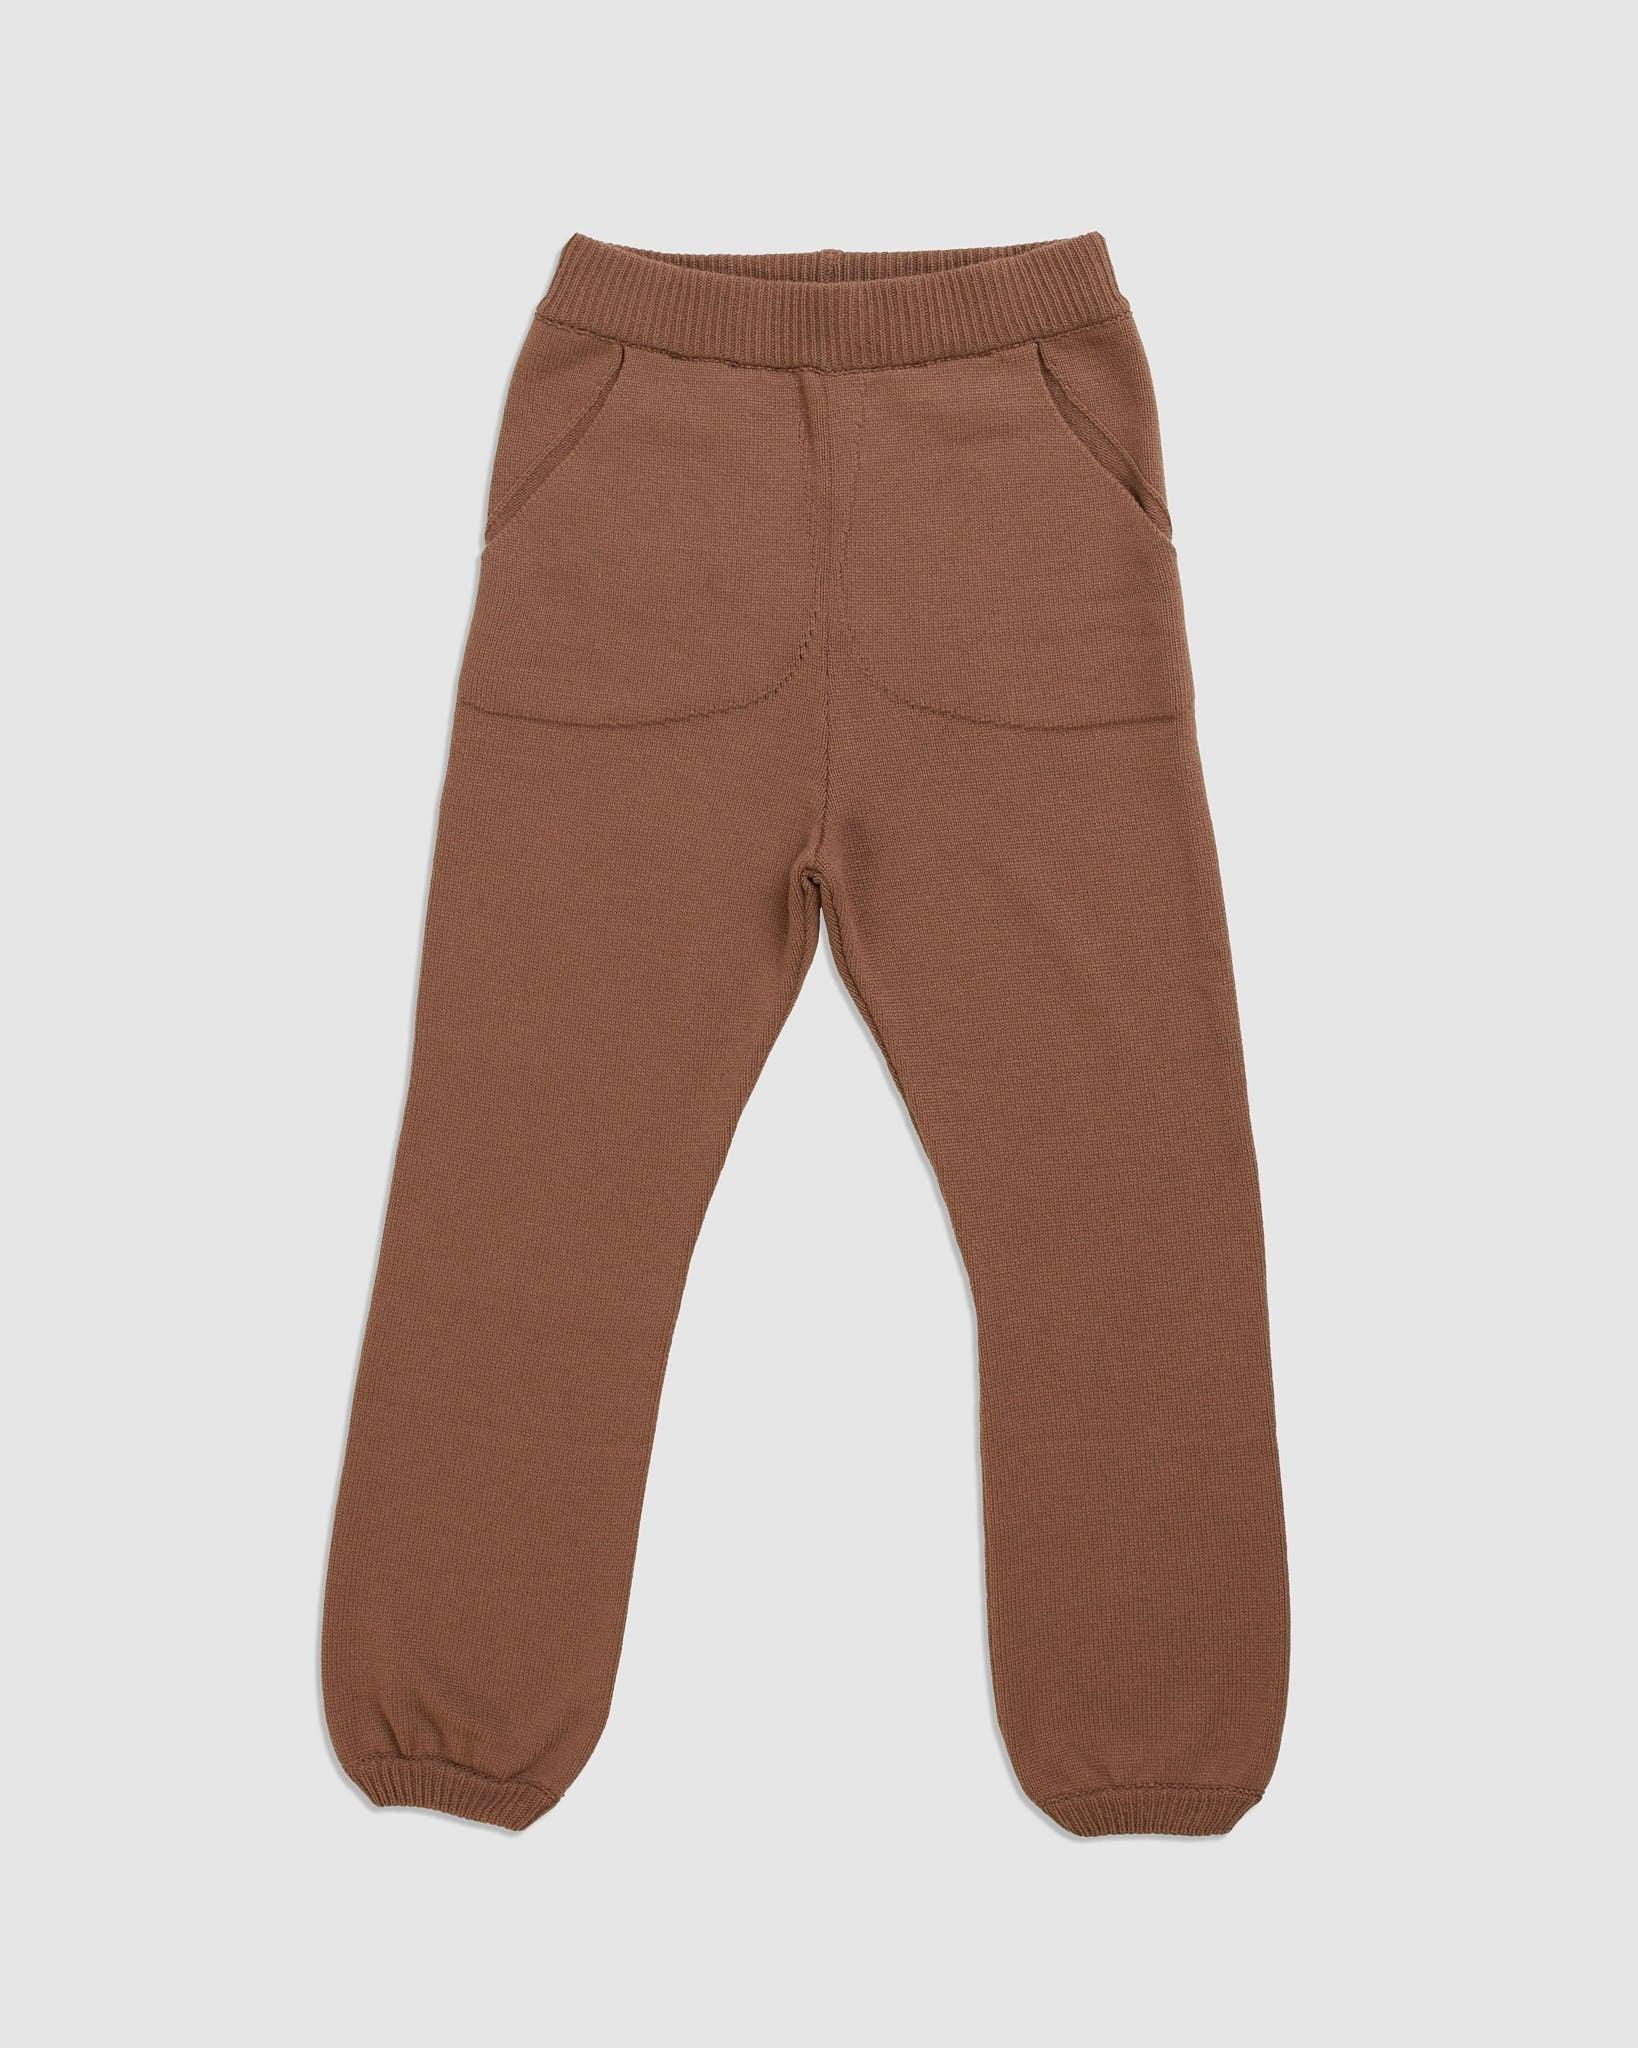 Daras Cashmere Lounge Pants - {{ collection.title }} - Chinatown Country Club 